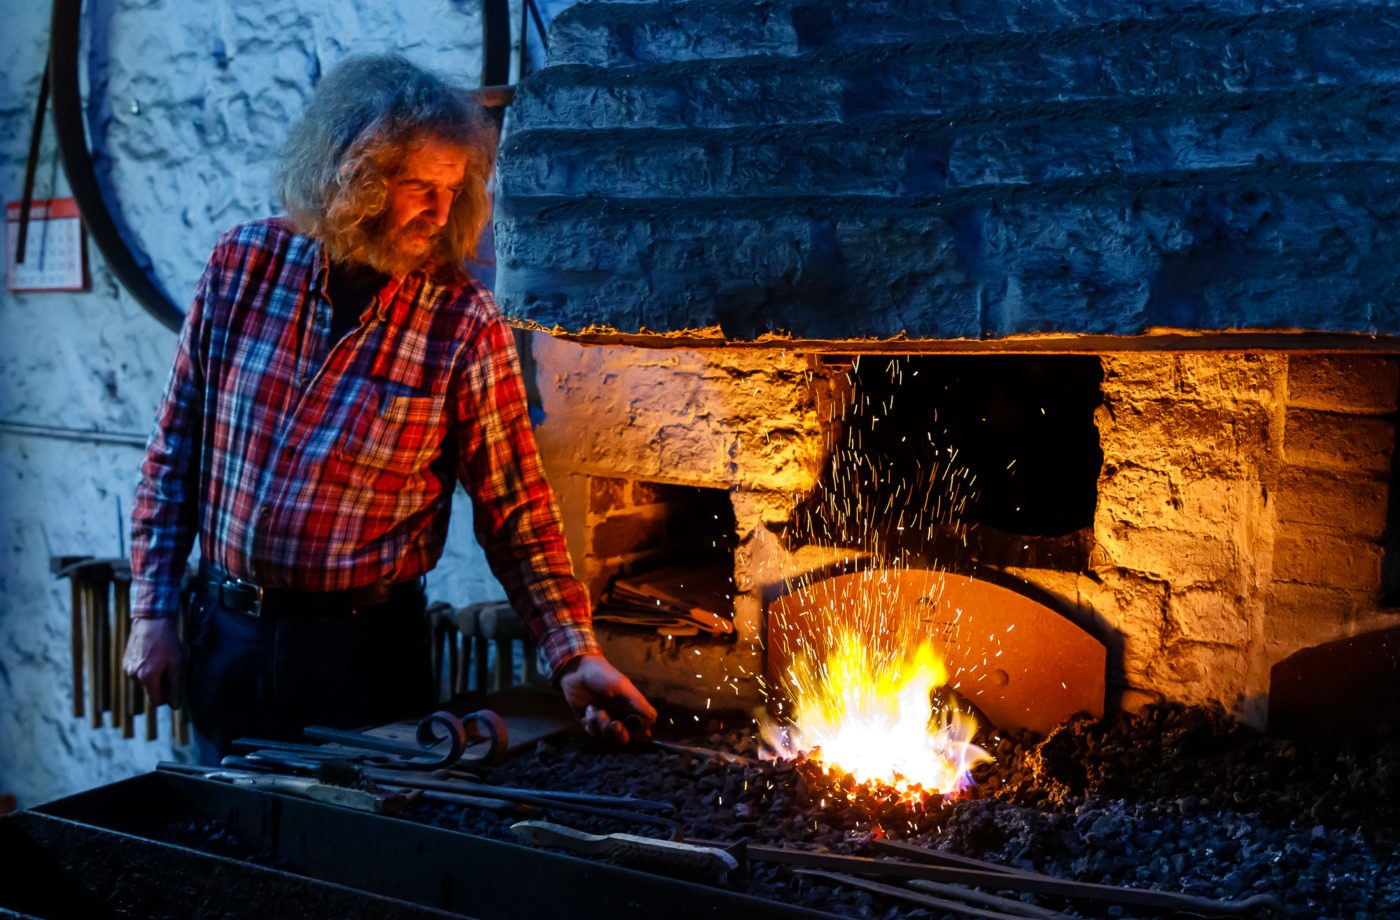 300 years of history in one blacksmith shop